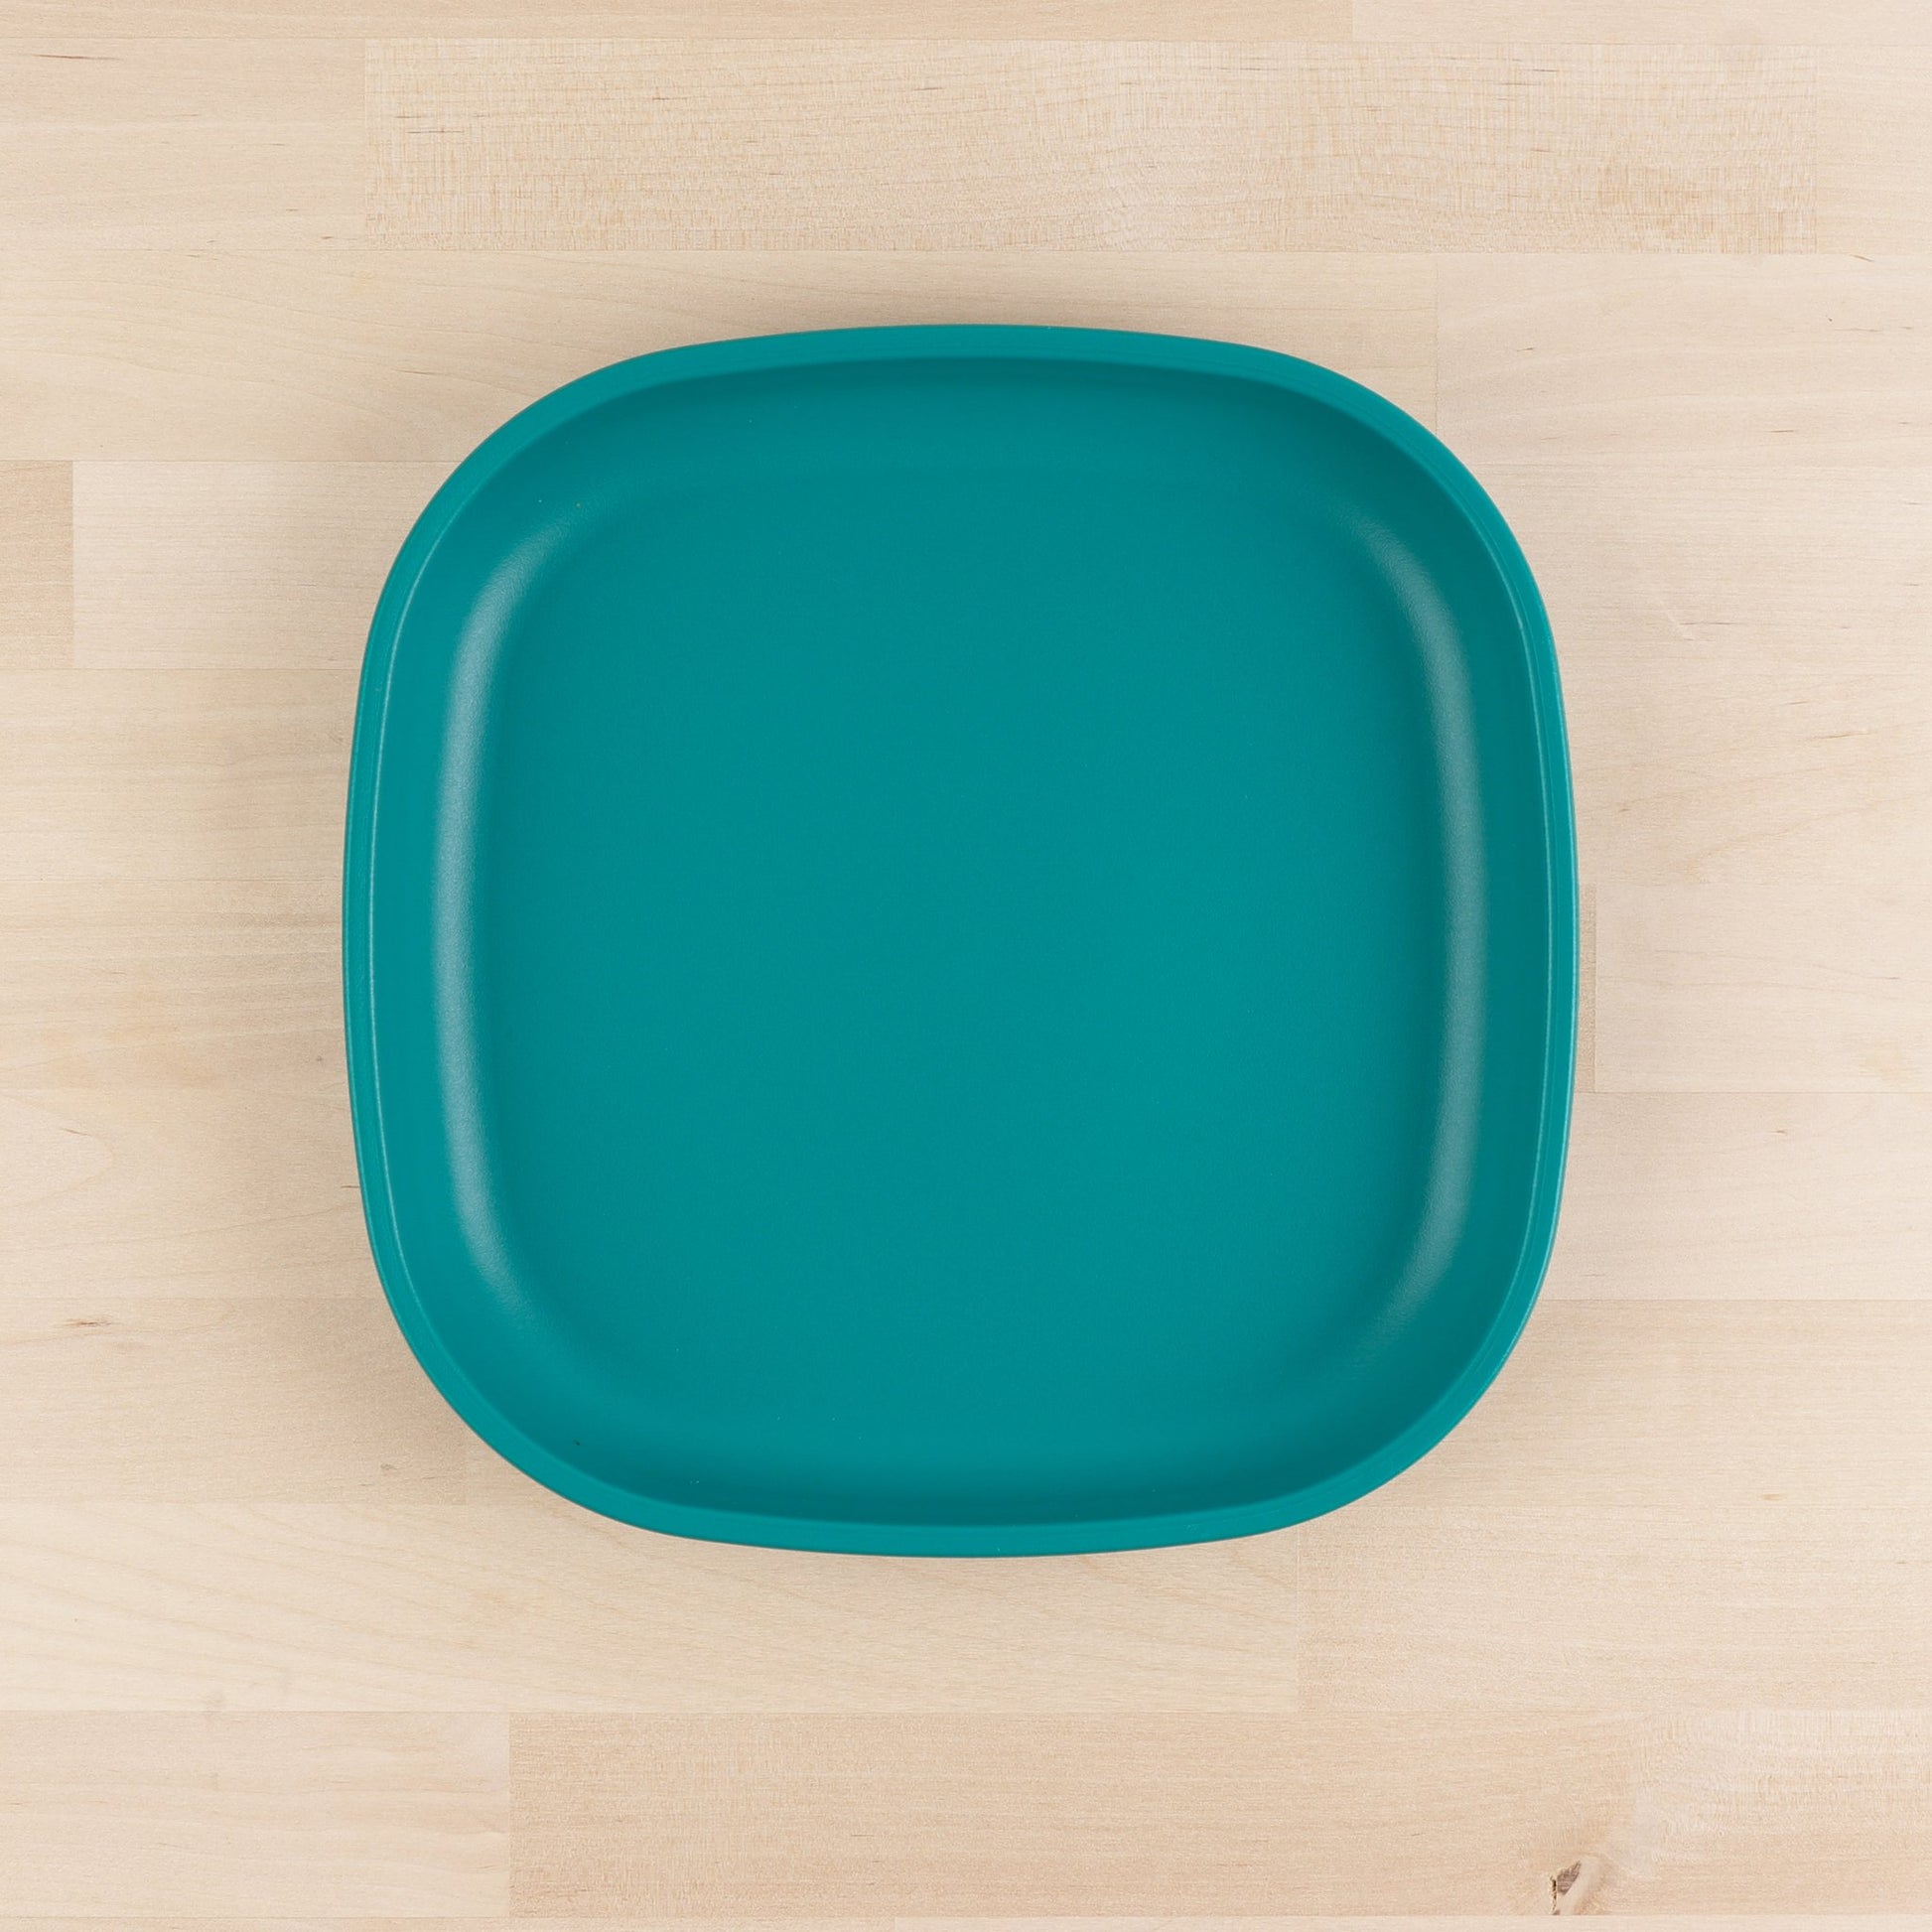 Re-Play Flat Plate Standard Size in Teal from Bear & Moo